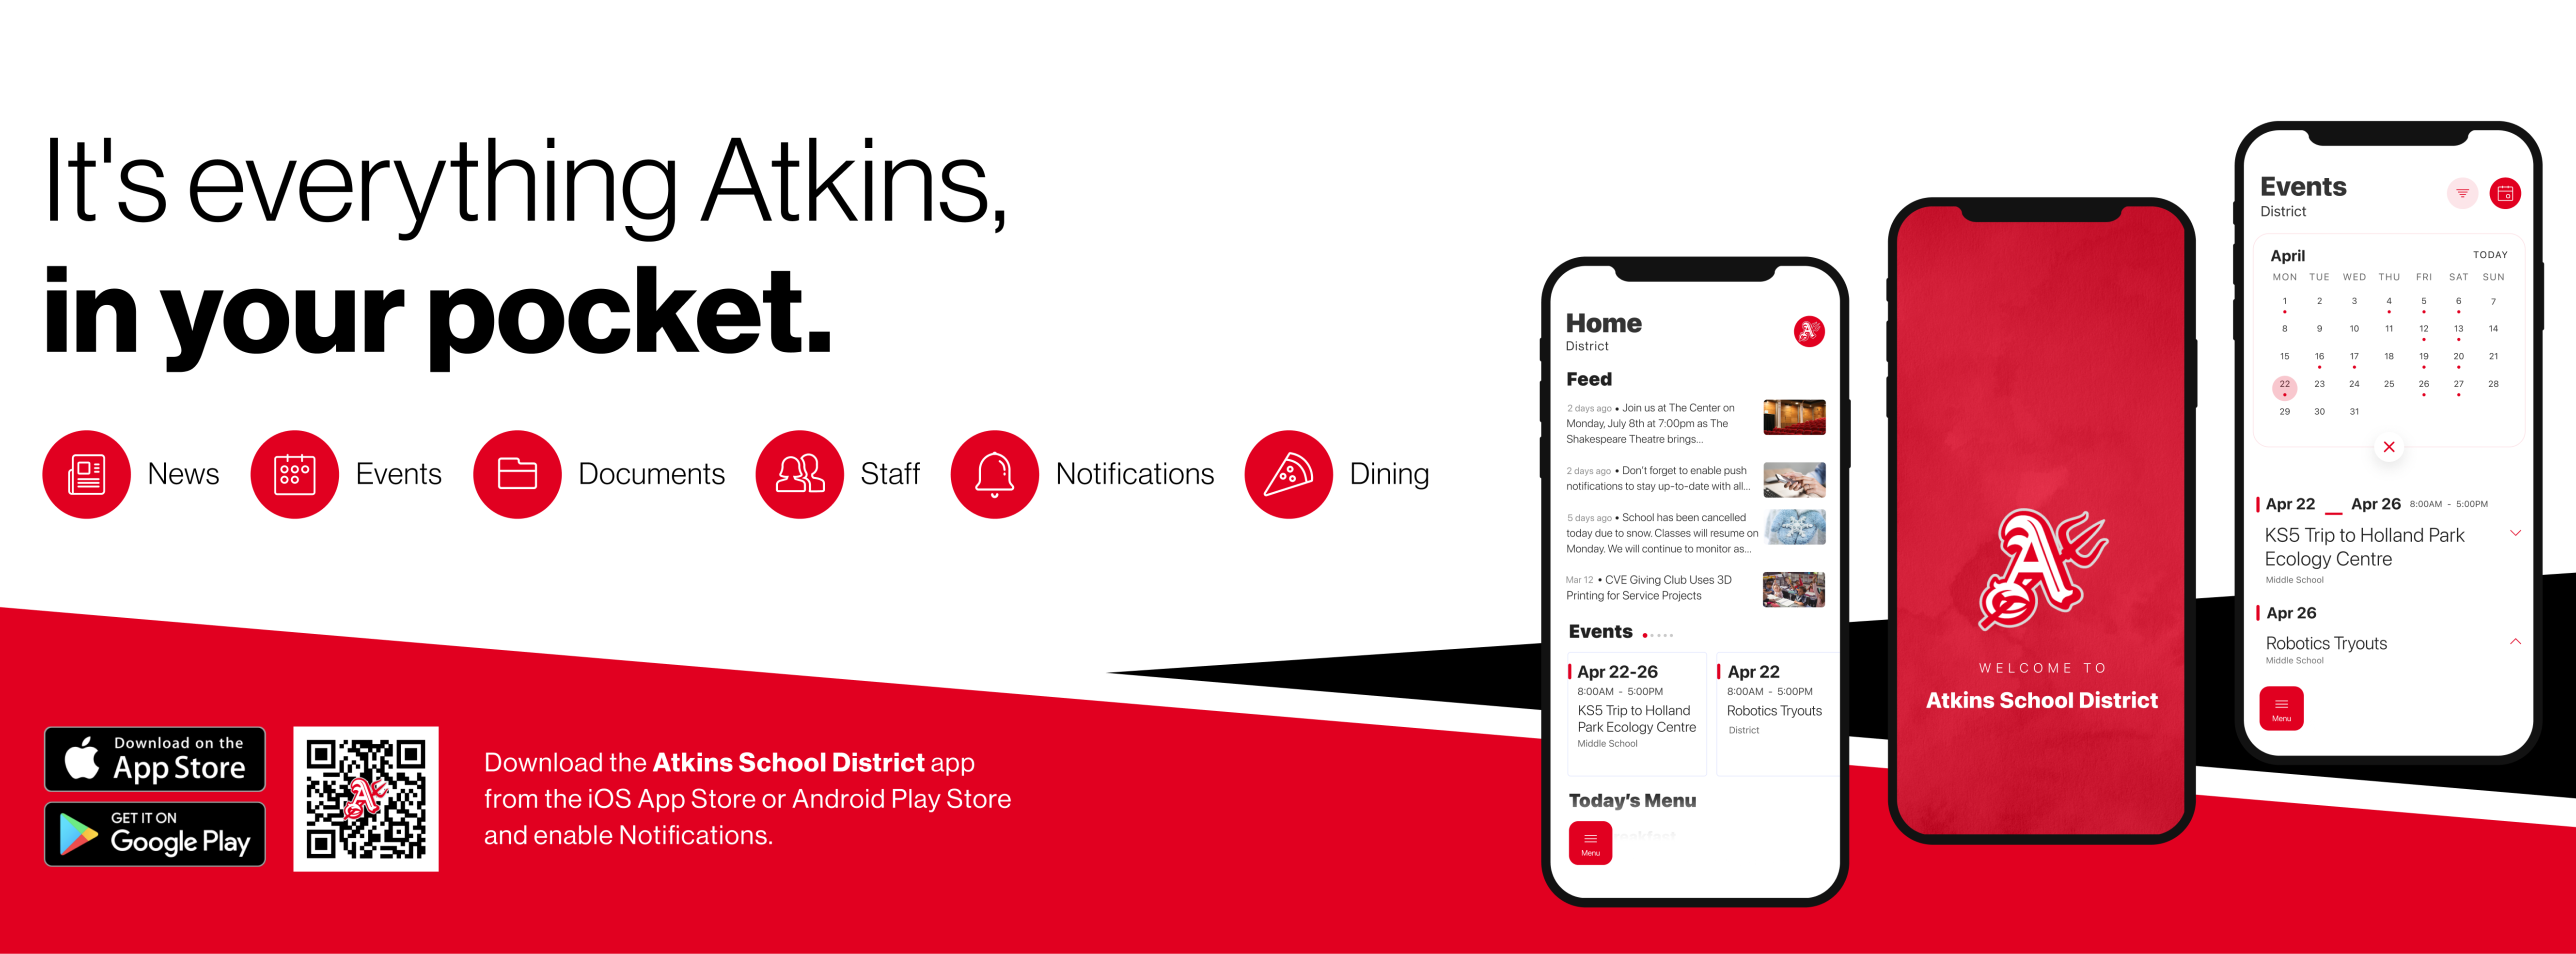 It's everything Atkins, in your pocket.